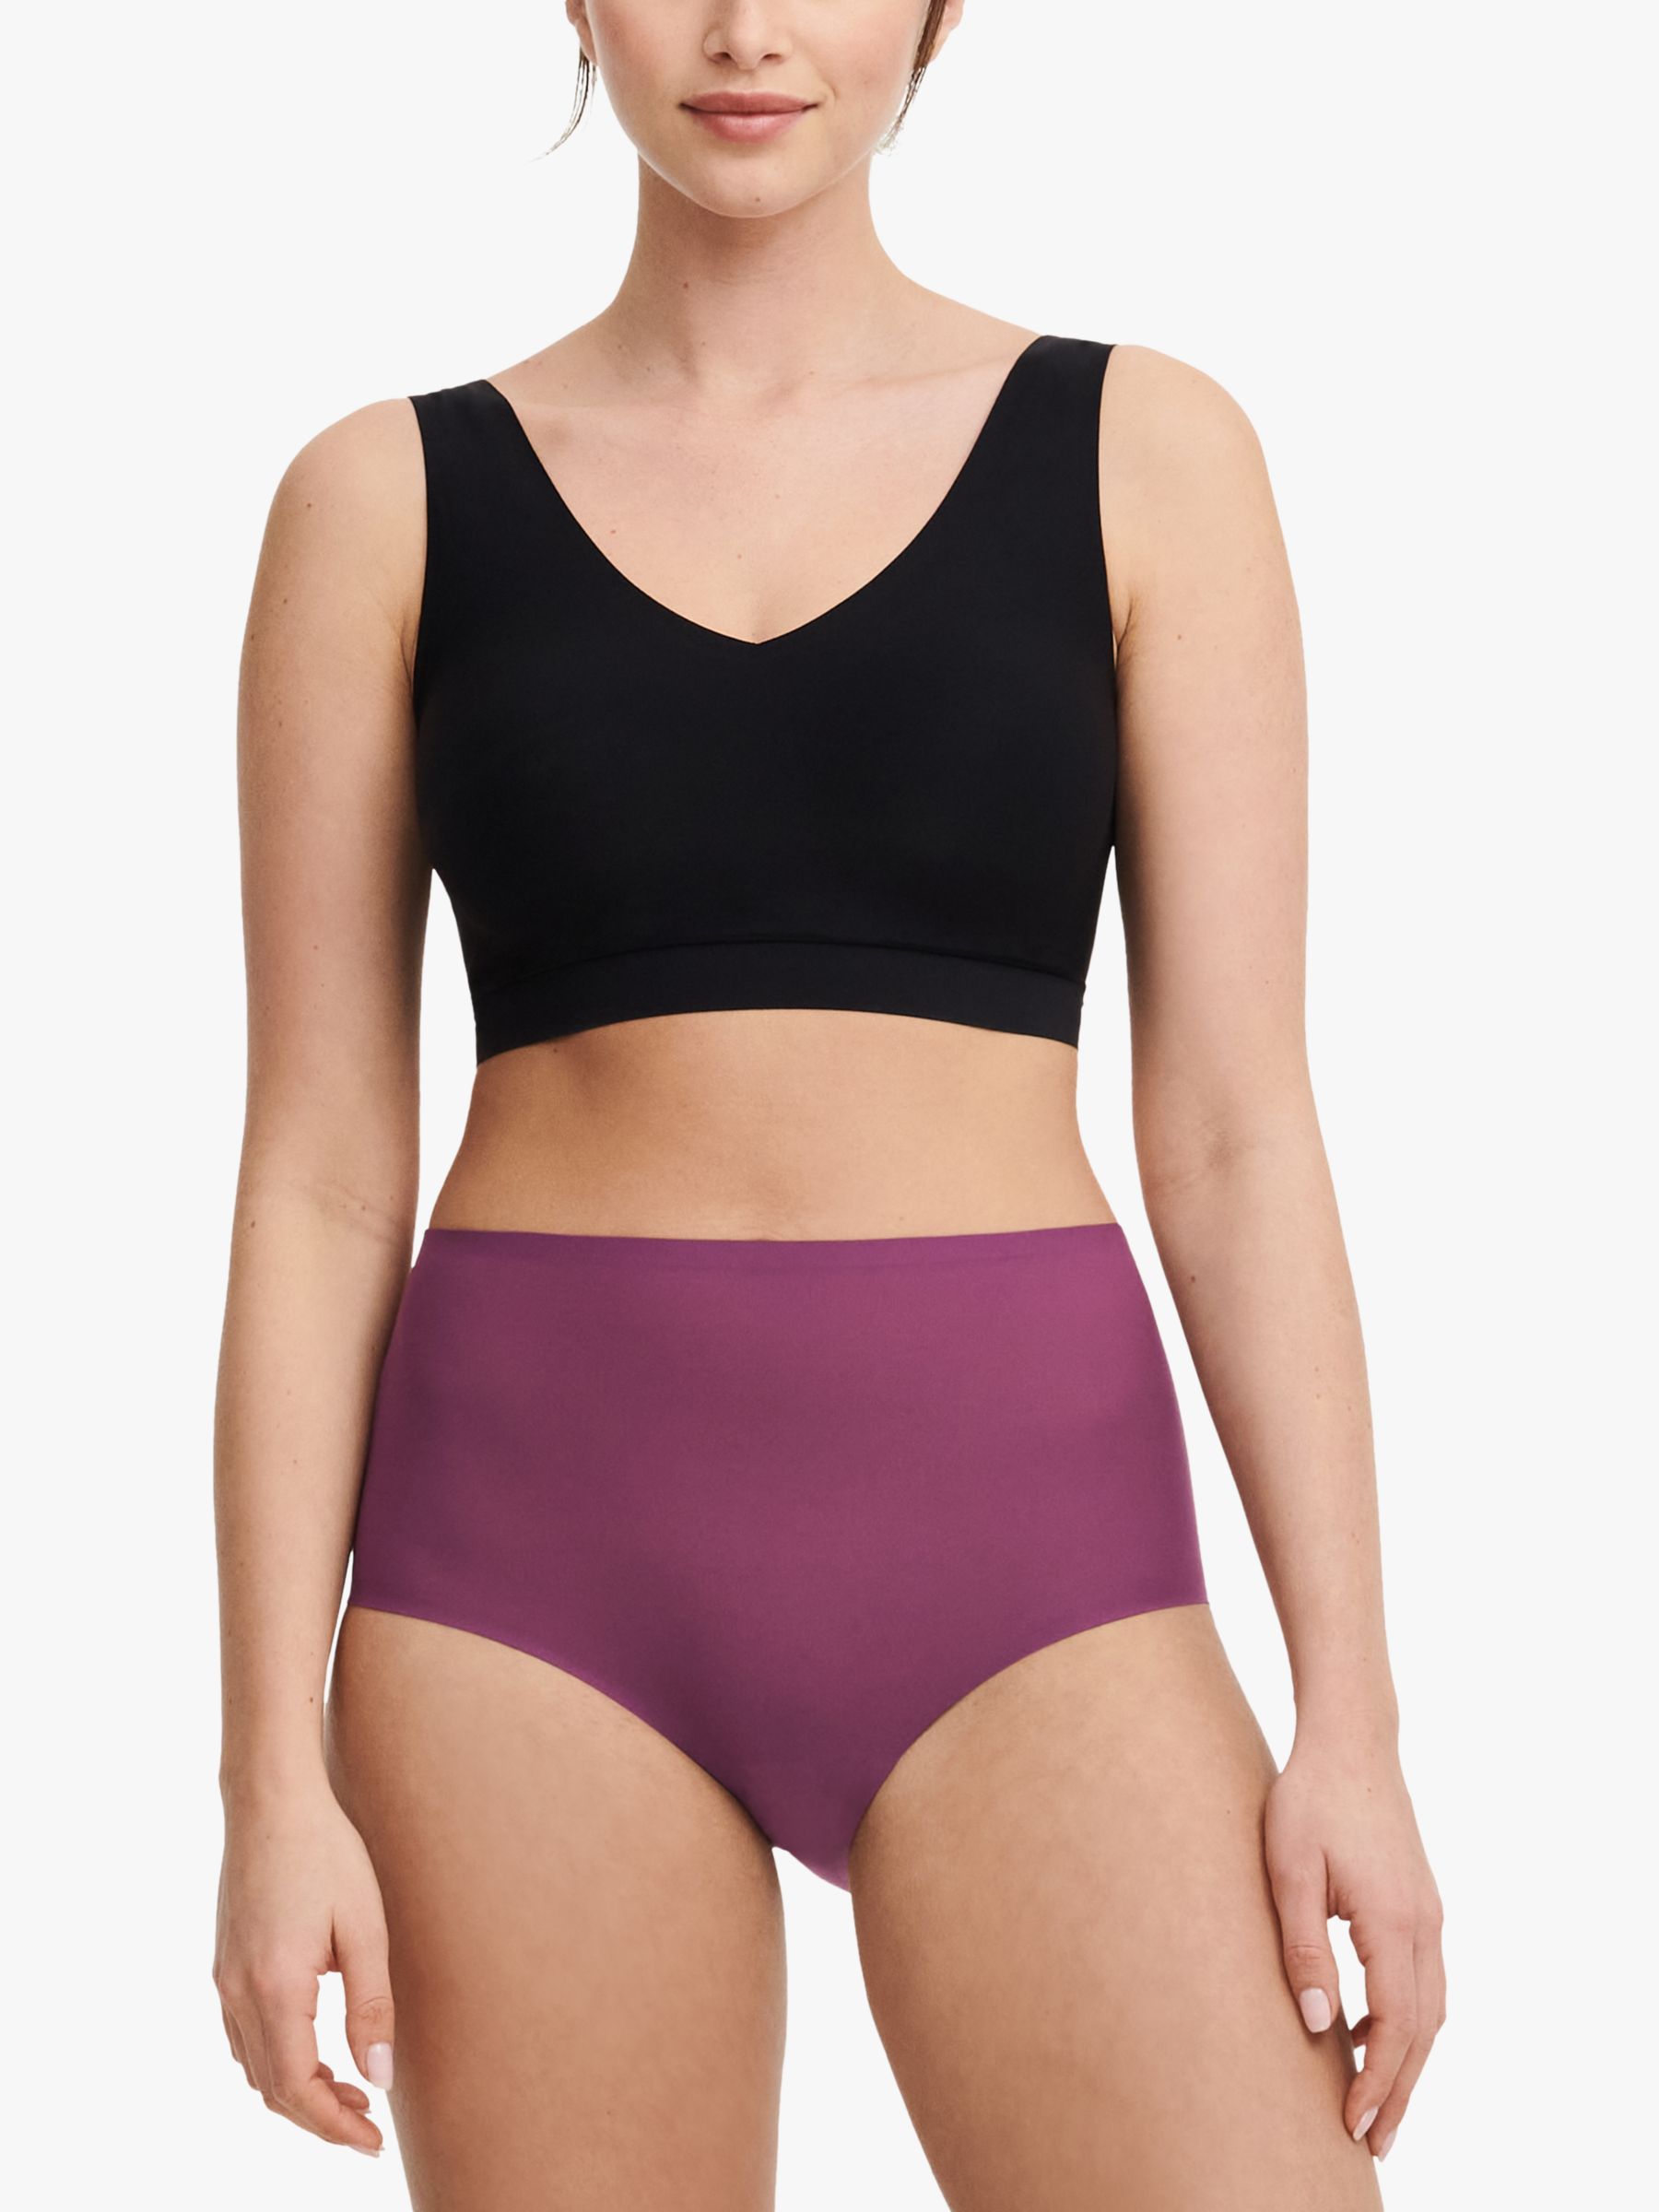 Chantelle Soft Stretch High Waisted Knickers, Tannin Purple, One Size